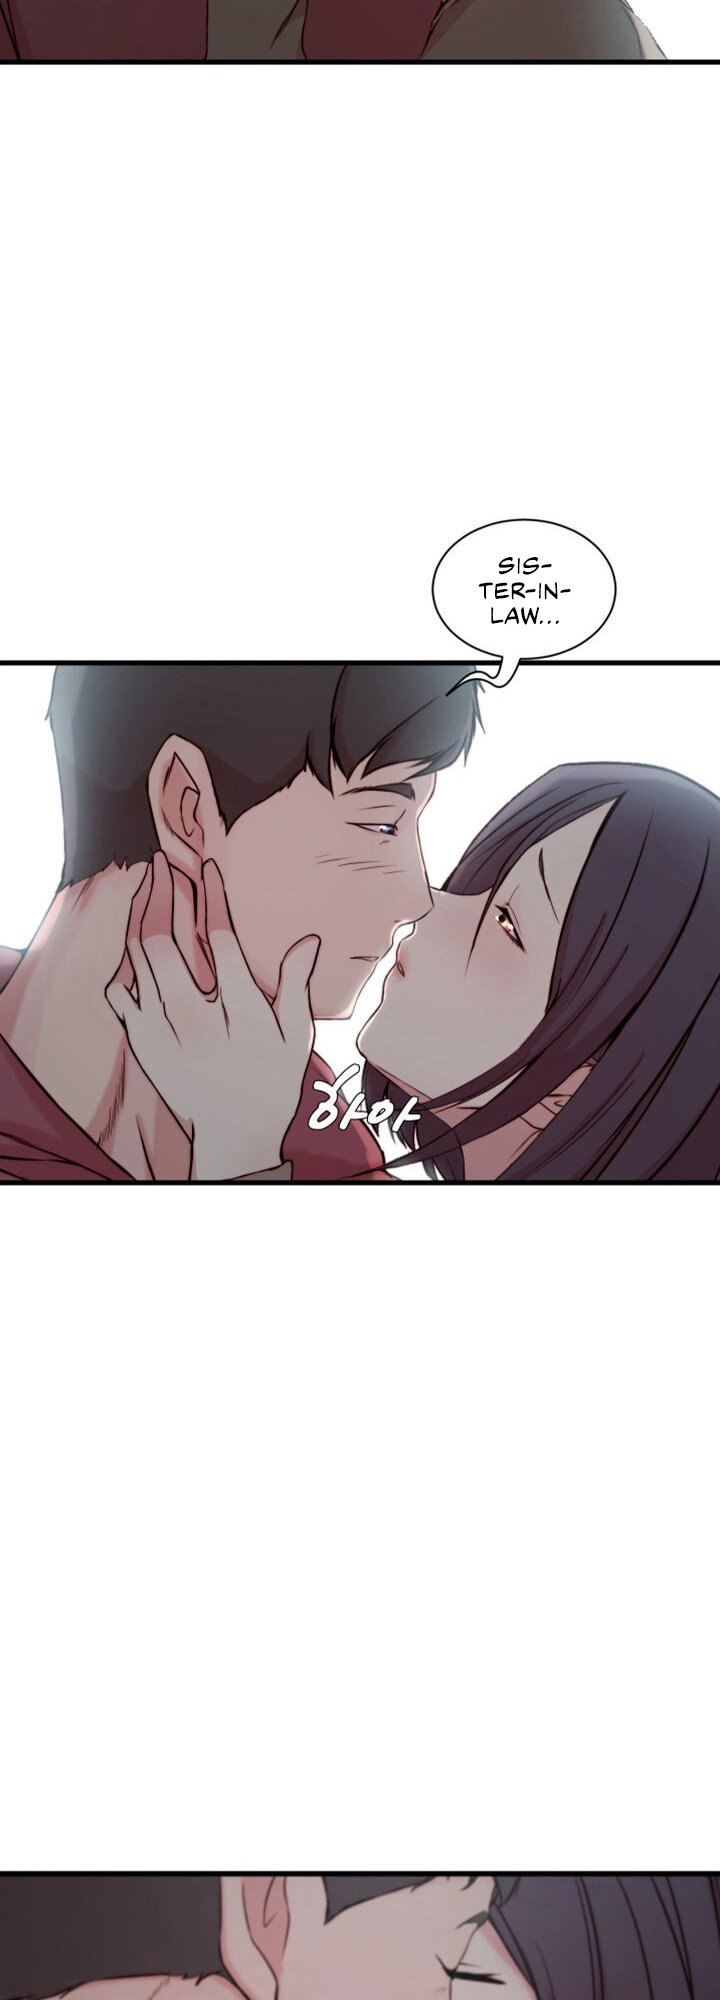 Sister-in-Law Manhwa - Chapter 16 Page 18